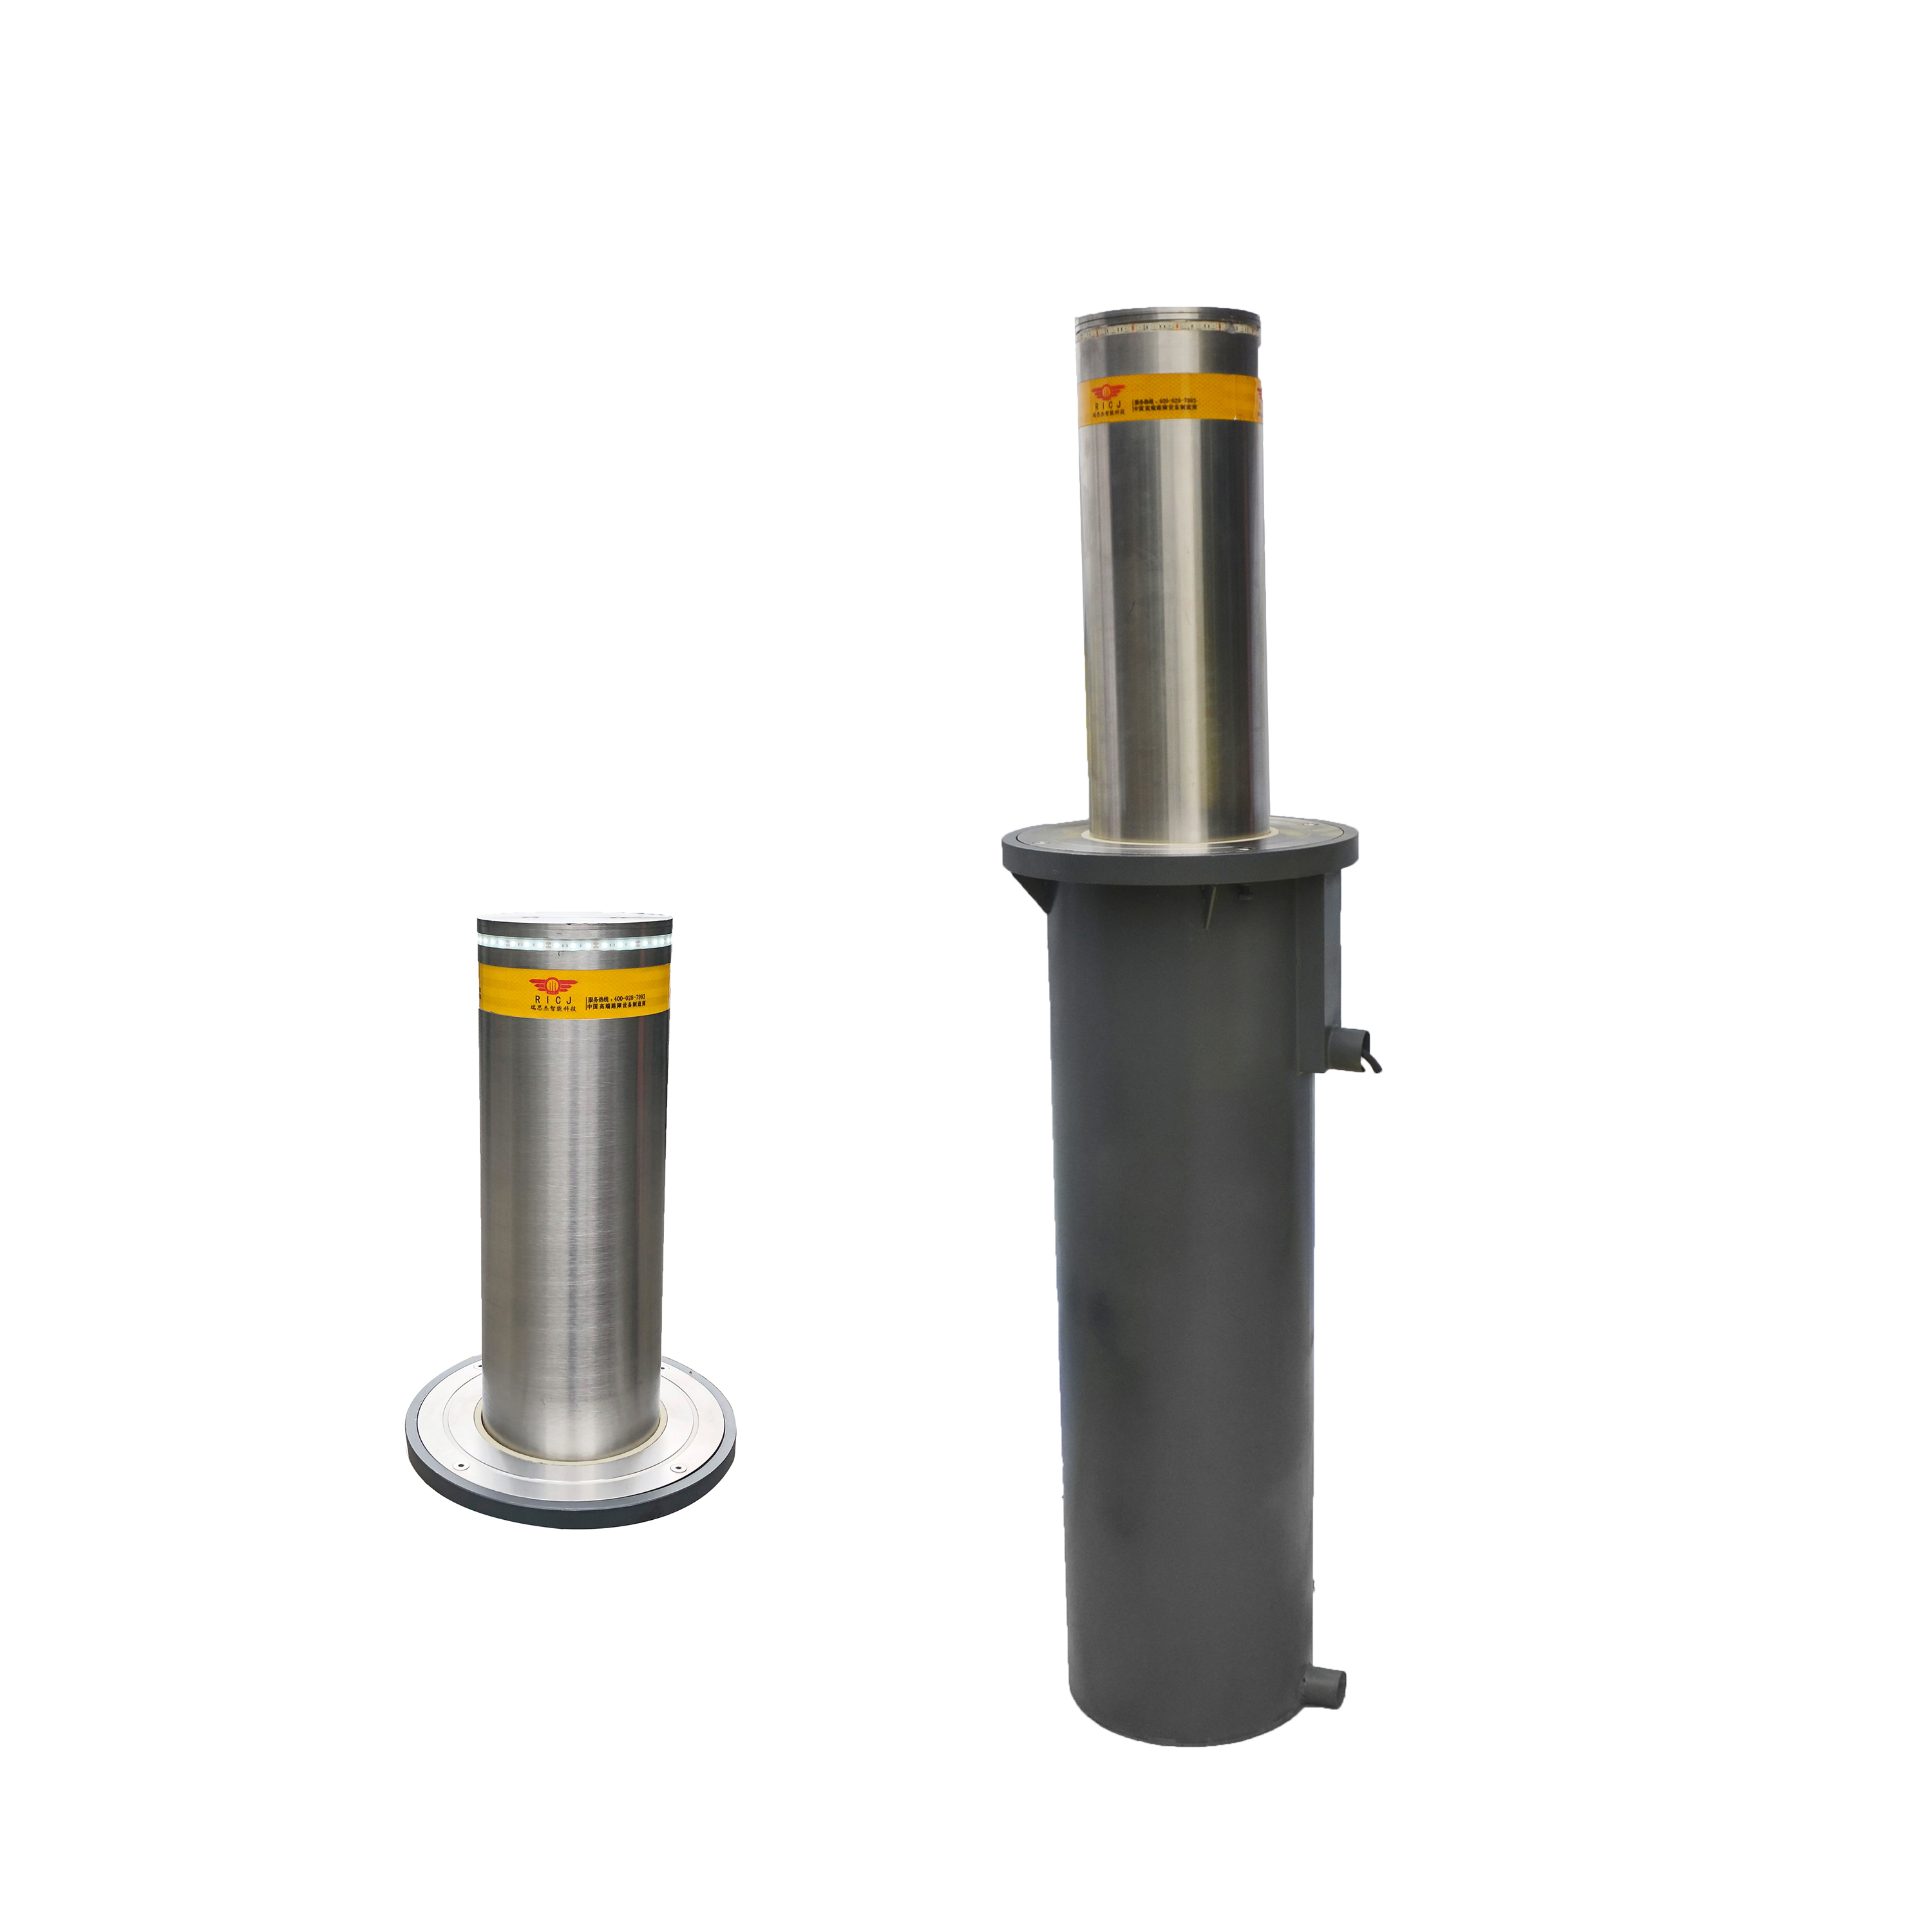 High Quality Heavy Duty Parking Bollards Featured Image